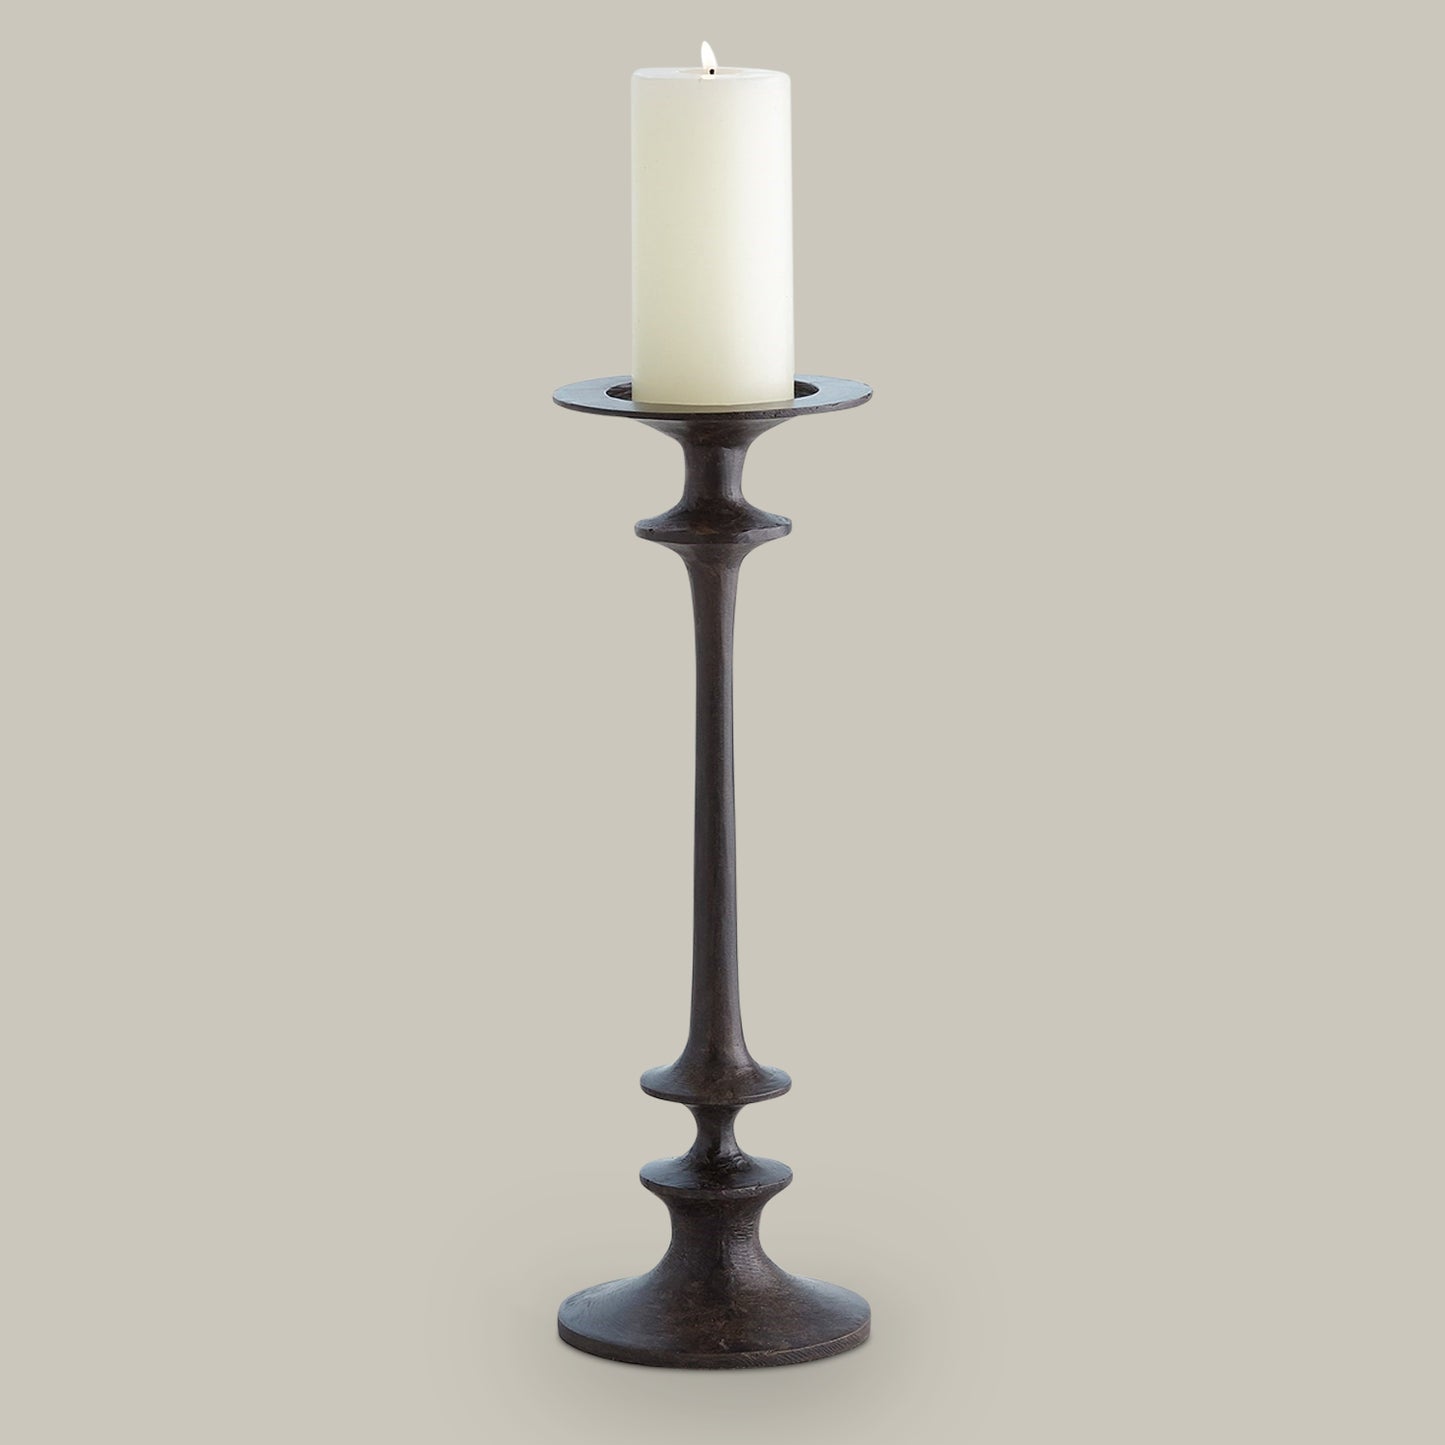 THÉOPHILE CANDLE HOLDER COLLECTION - Preorder